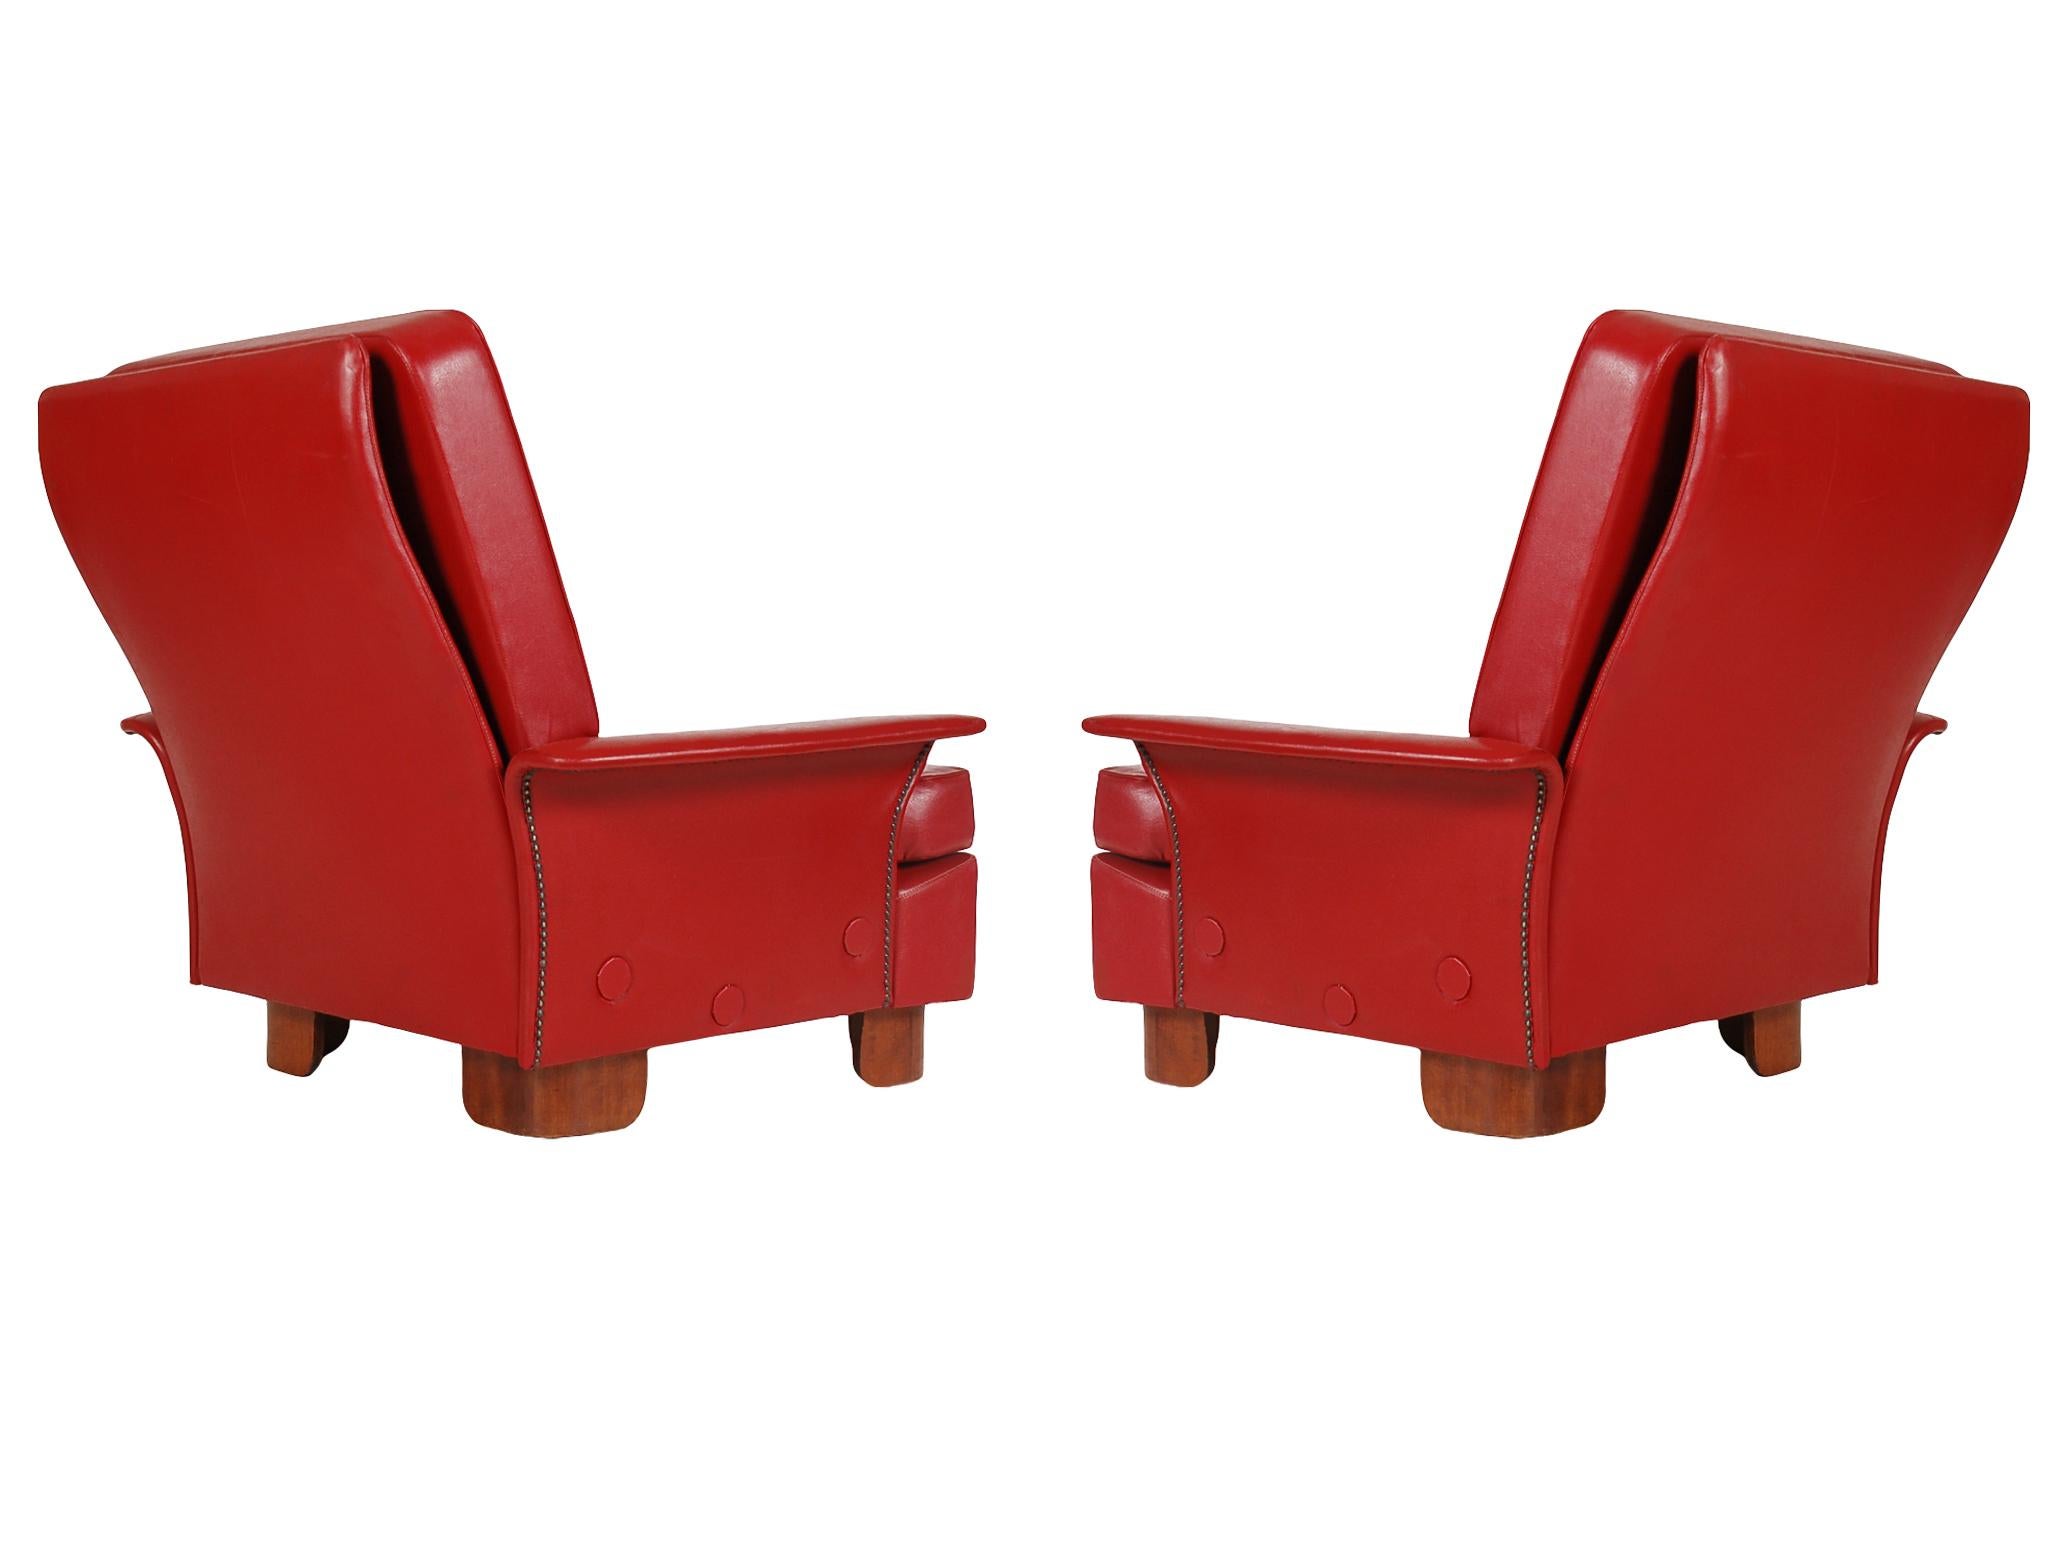 Mid-20th Century Pair of Midcentury Italian Modern Art Deco Lounge or Club Chairs in Red For Sale